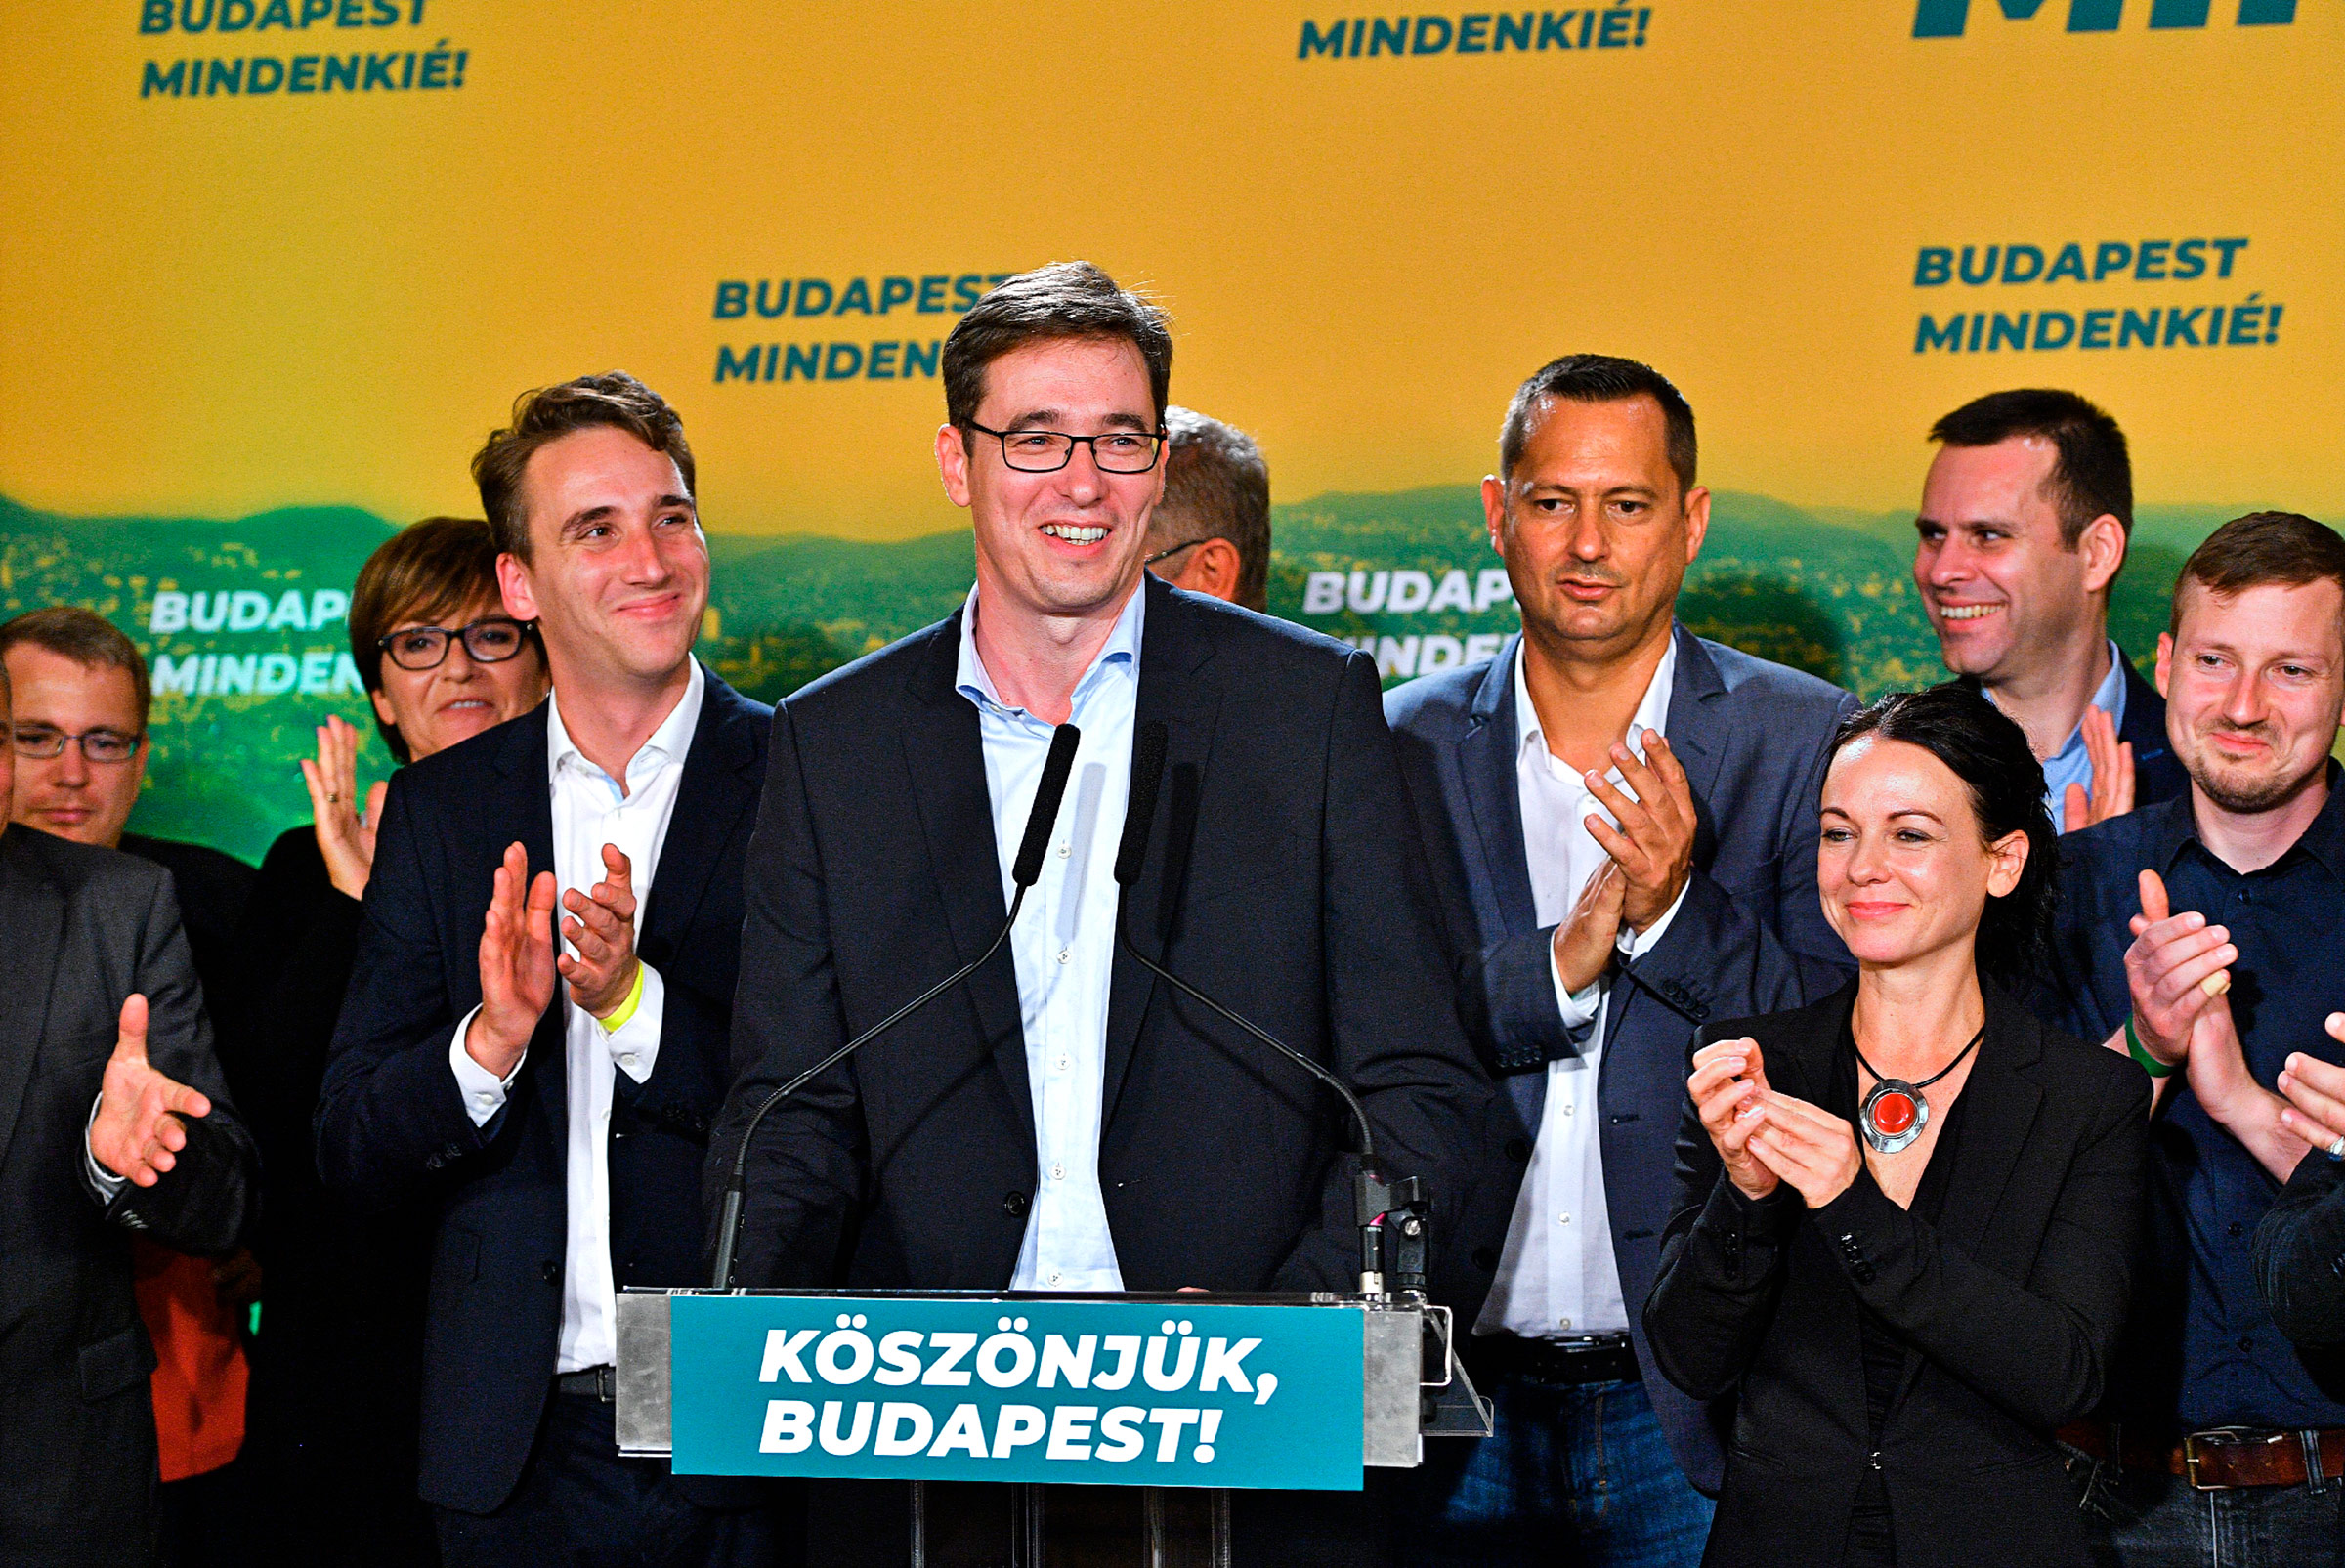 Karacsony’s election in October 2019 was the first electoral defeat for Fidesz in nine years